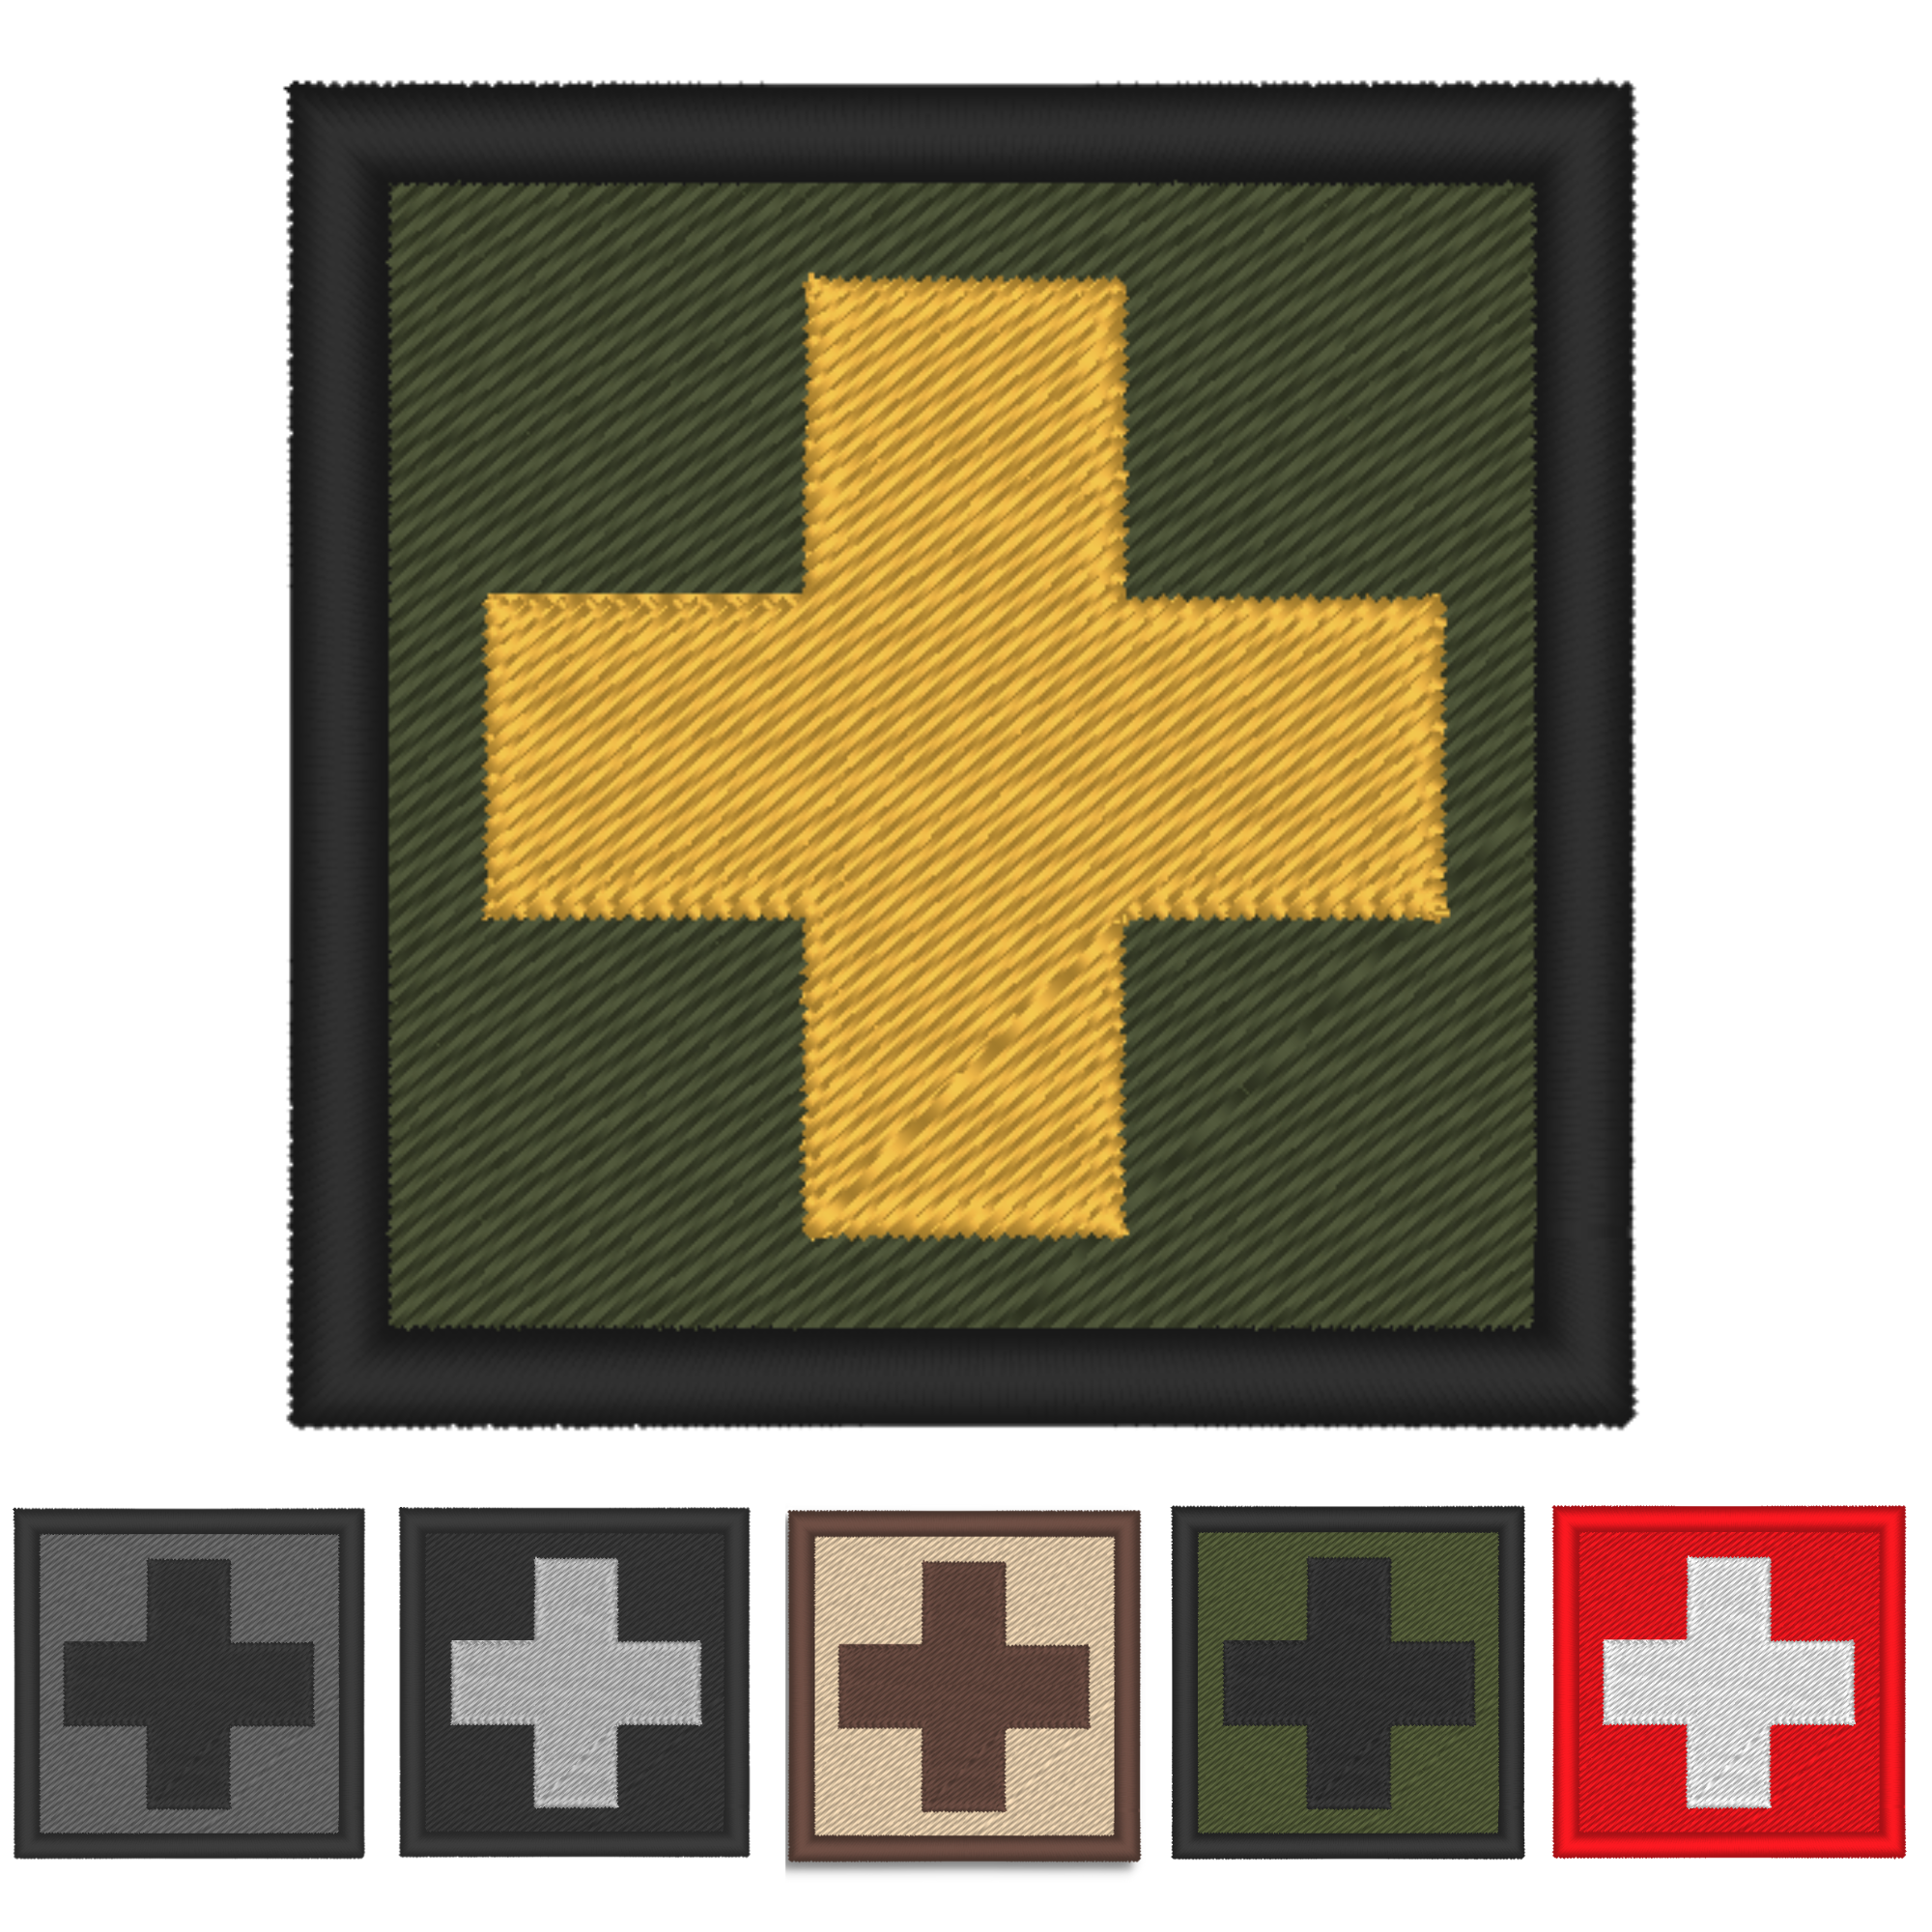 Medic Rubber Patch, grau/schwarz, Function Patches